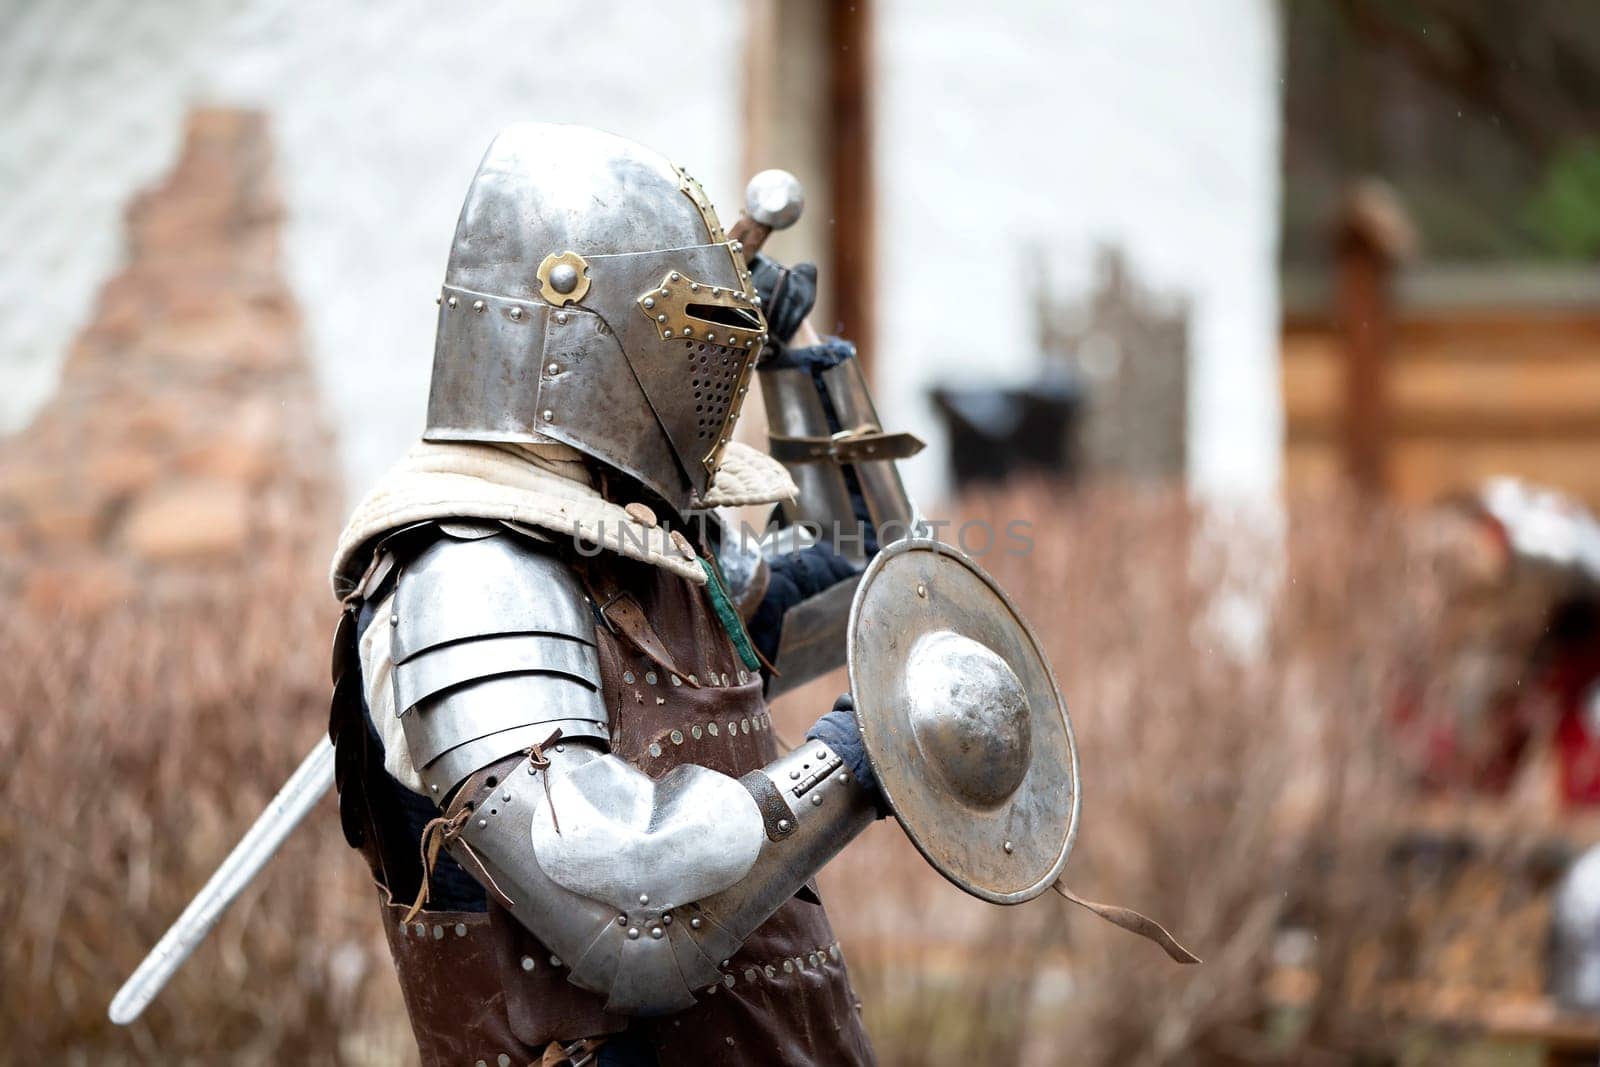 Antique medieval knight in armor with a protective metal shield. Iron age. by Sviatlana